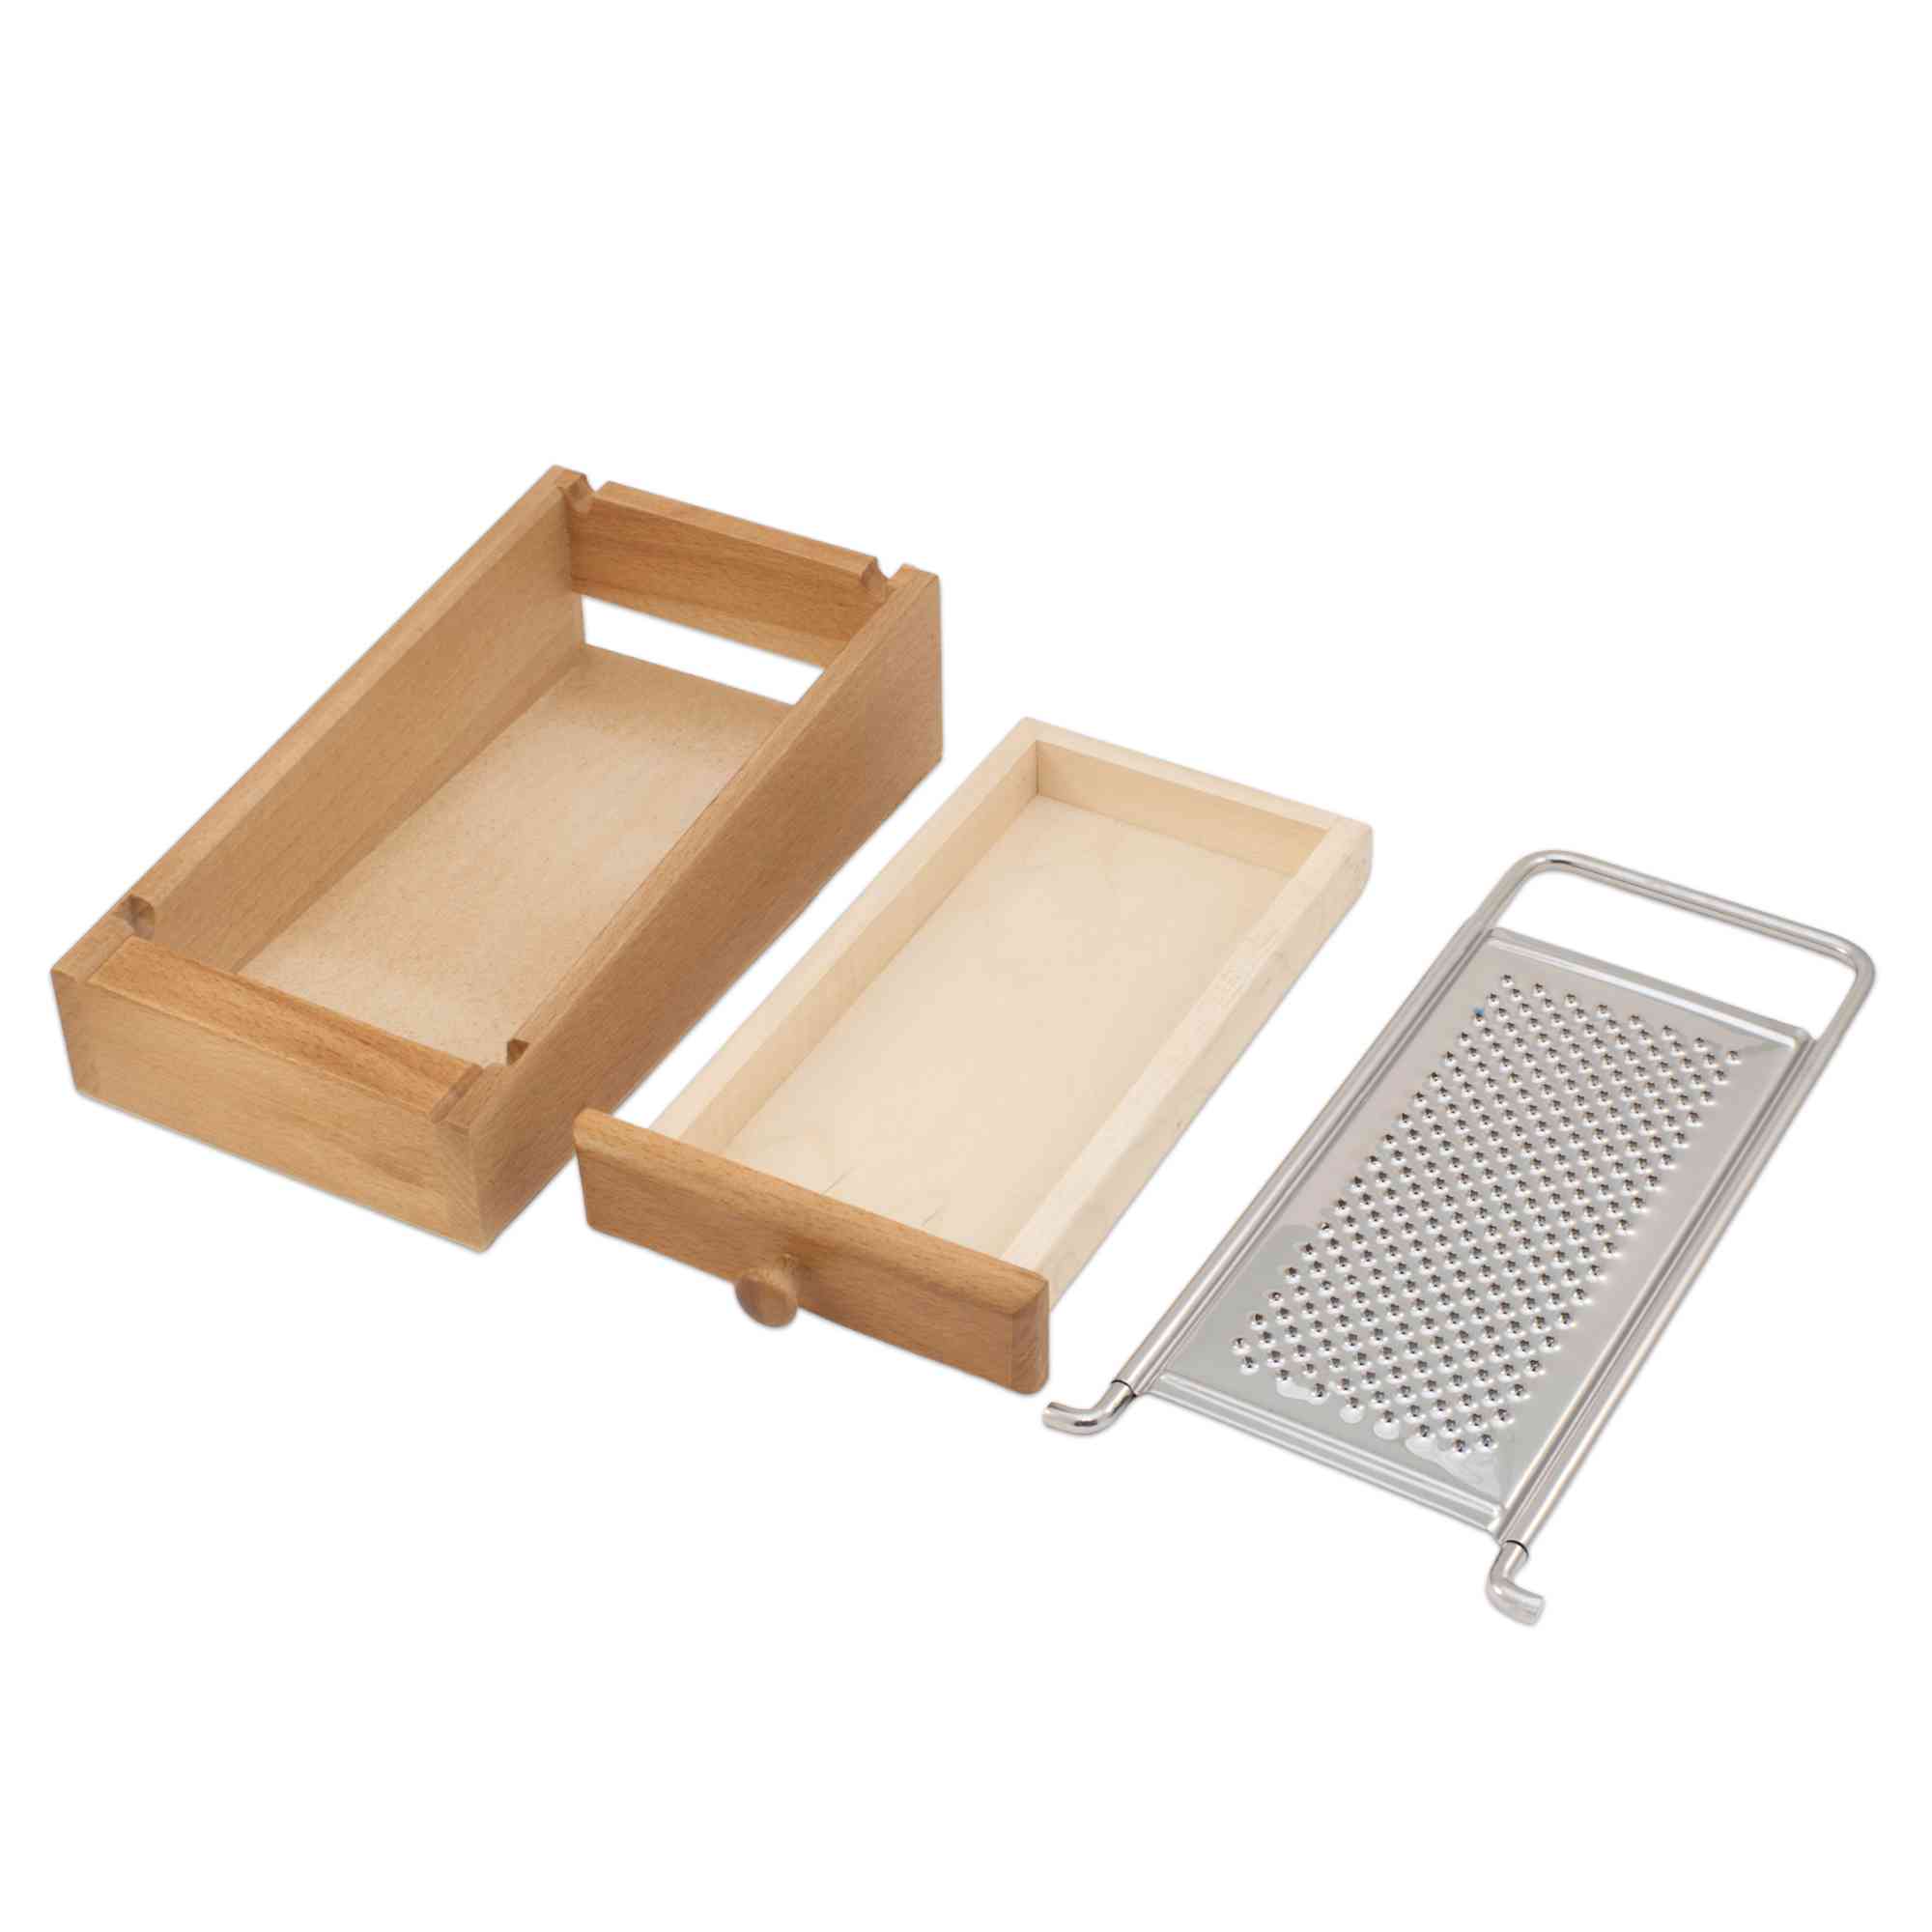 Inox Italian Hand Cheese Grater Removable Olive Wood Box For Hard Cheeses